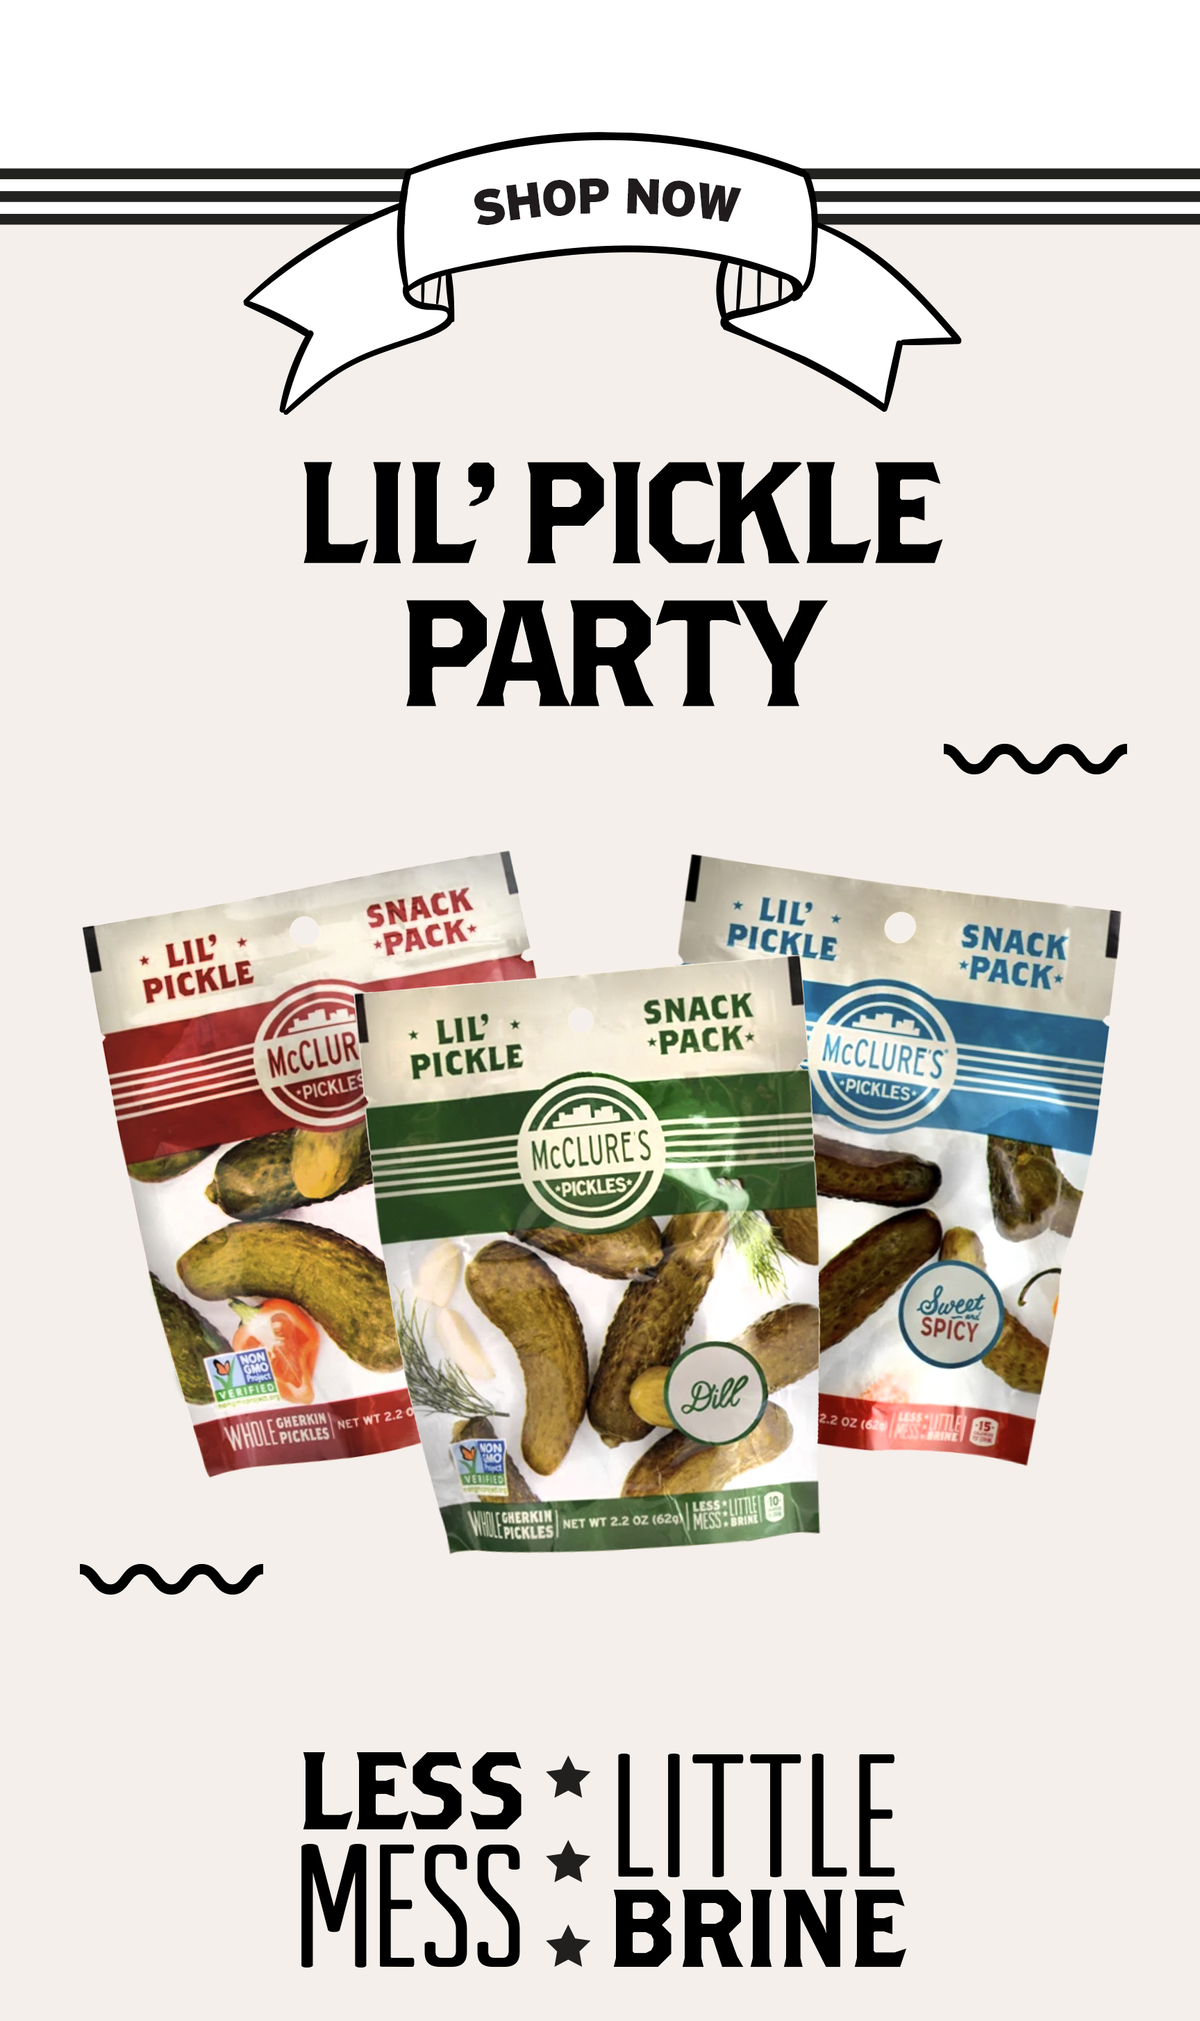 Lil Pickle Party - Get our new Snack Packs, now 20% off!